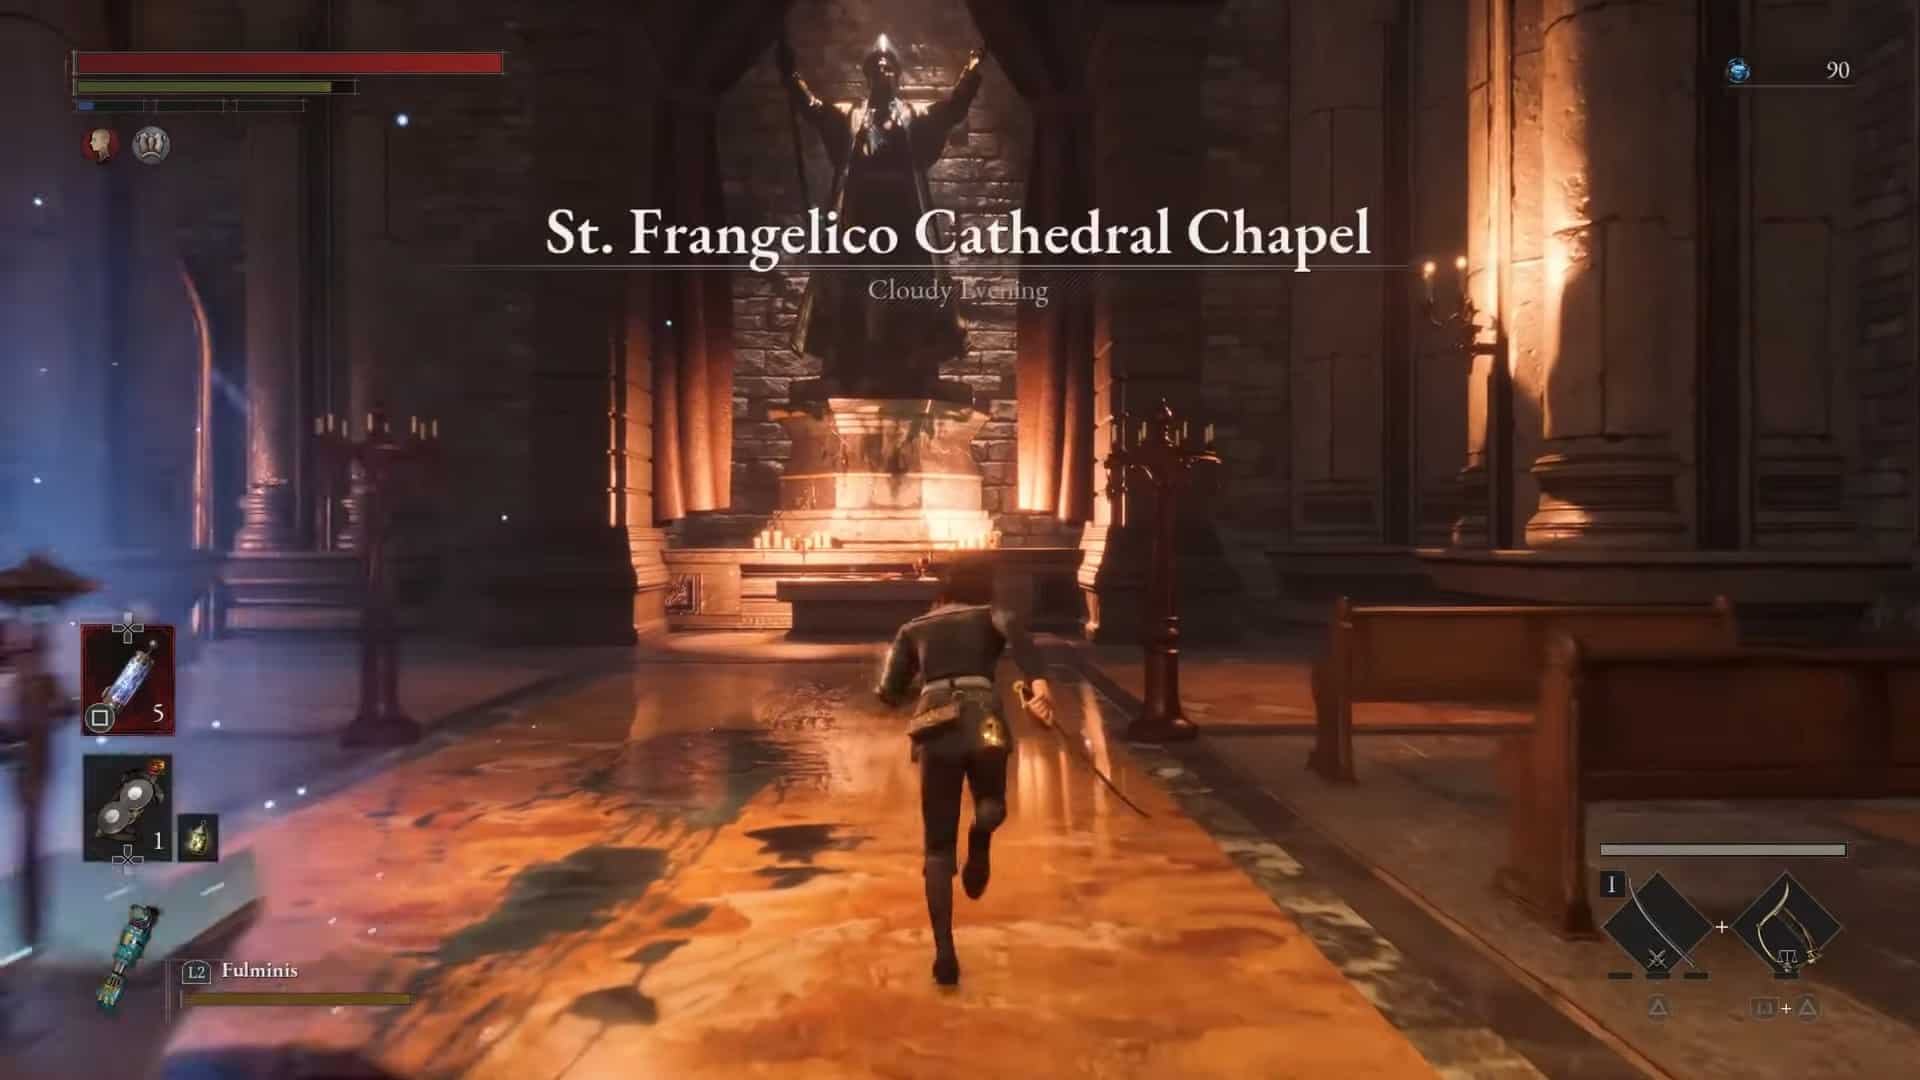 Lies of St. Frangelico cathedral